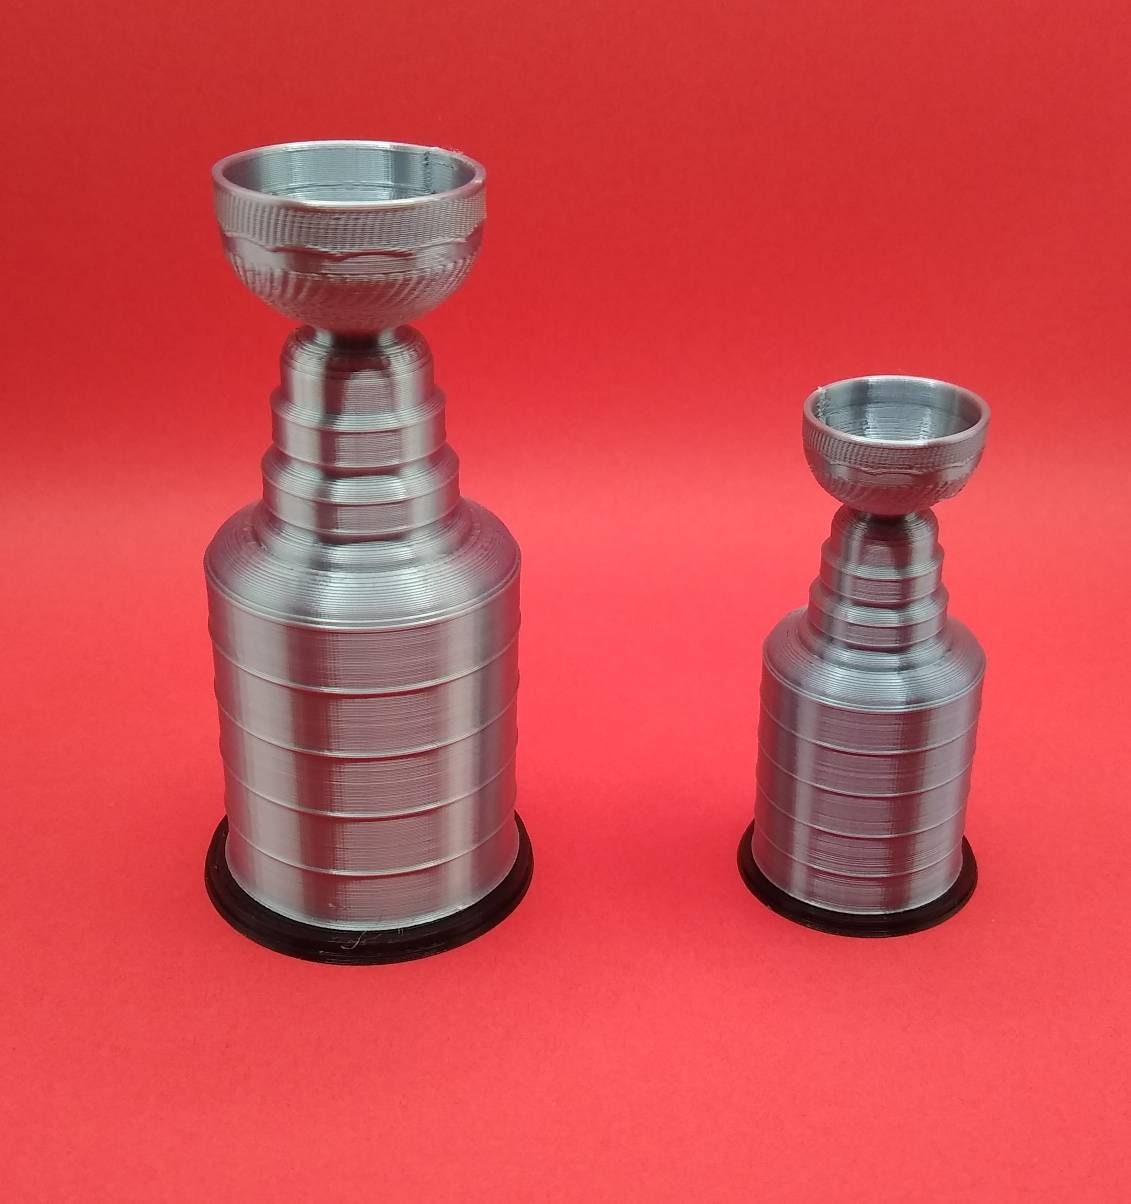 mini stanley cups with handles｜TikTok Search